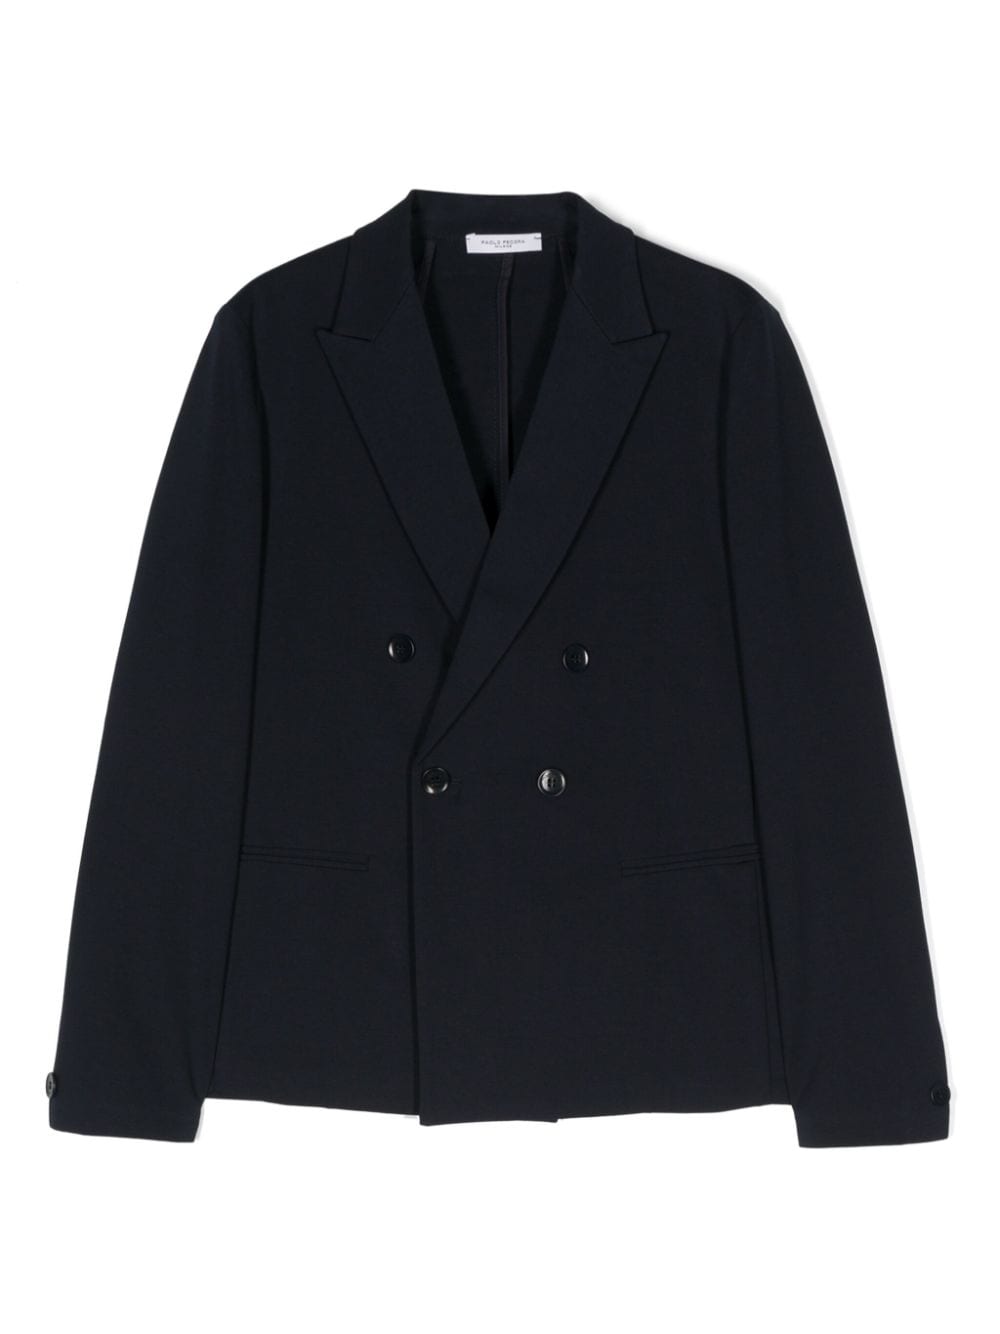 Image 1 of Paolo Pecora Kids double-breasted blazer